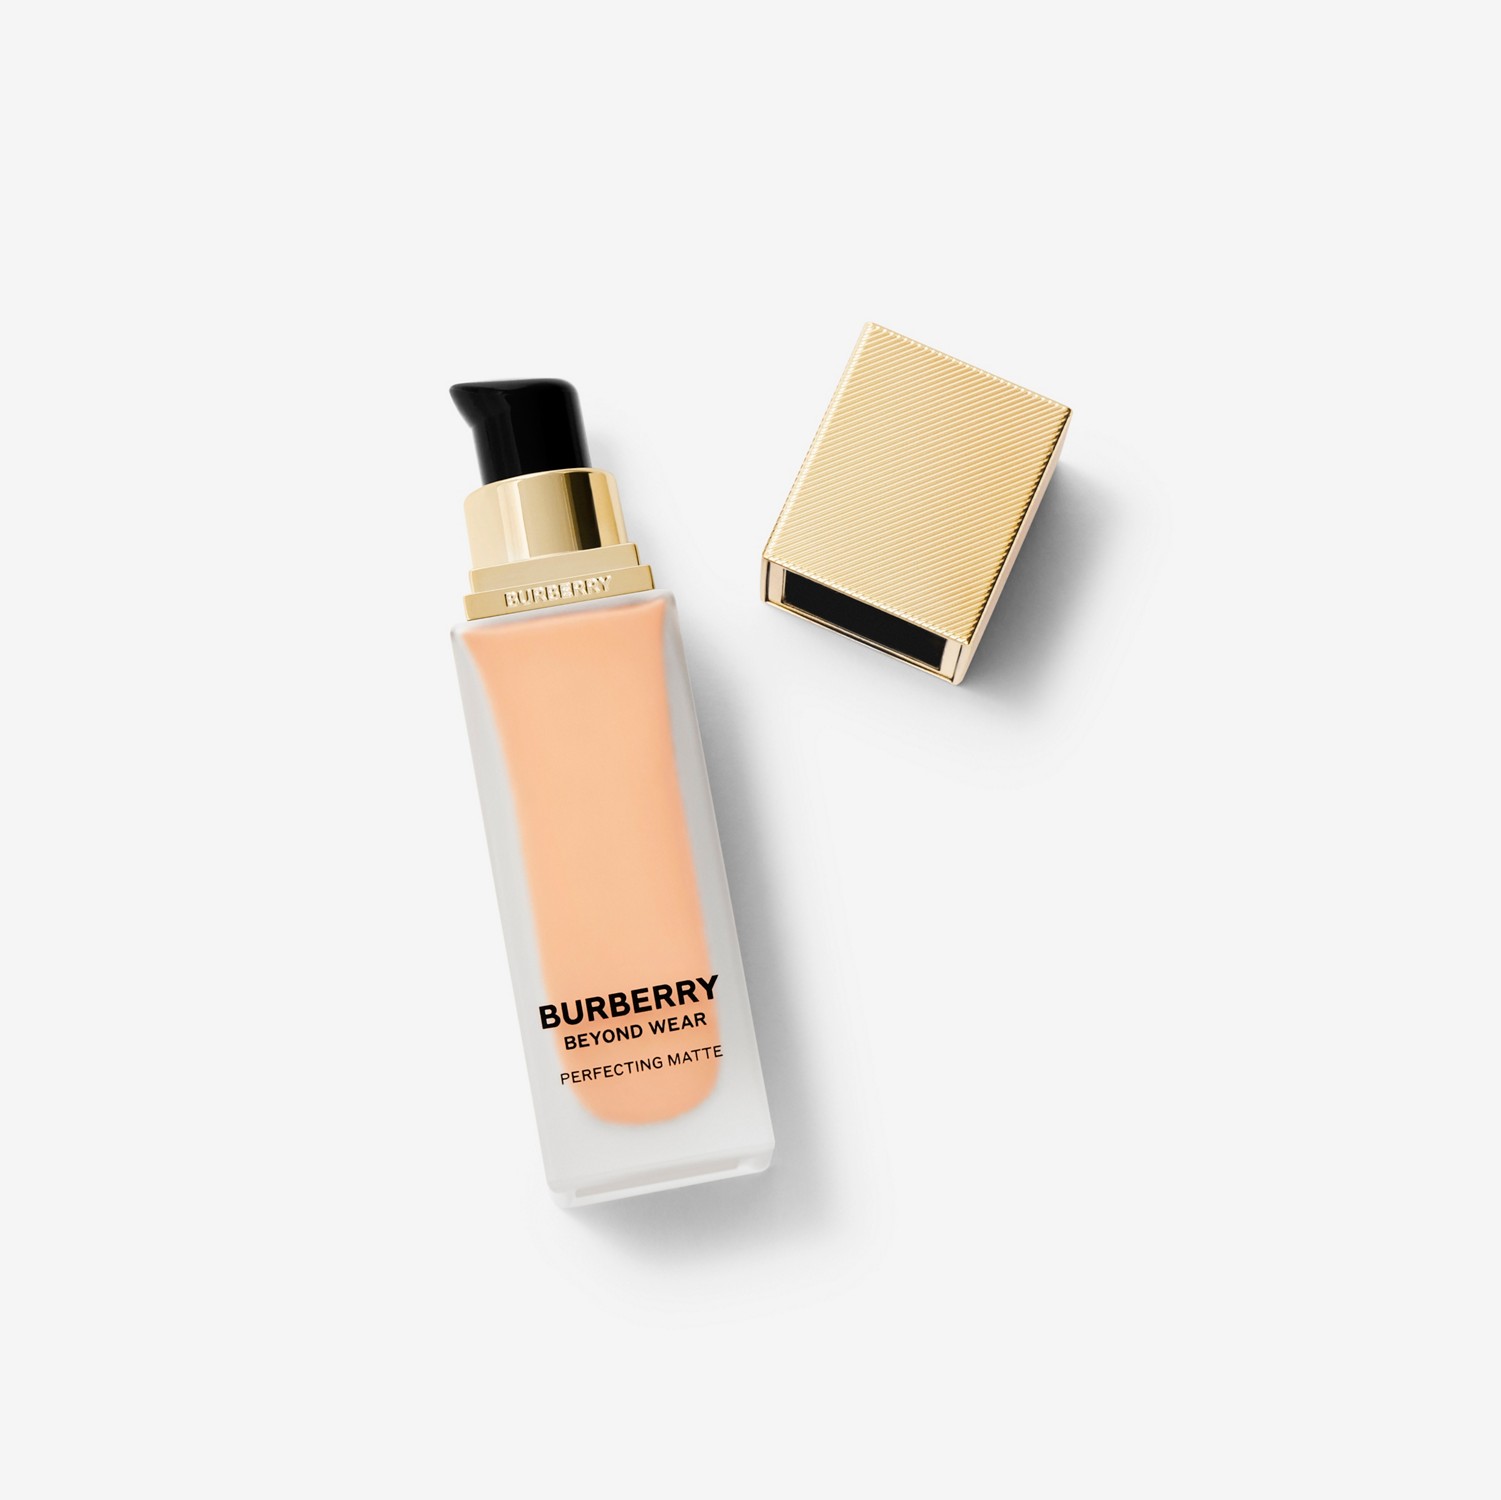 Beyond Wear Perfecting Matte Foundation – 40 Light Cool - Donna | Sito ufficiale Burberry®